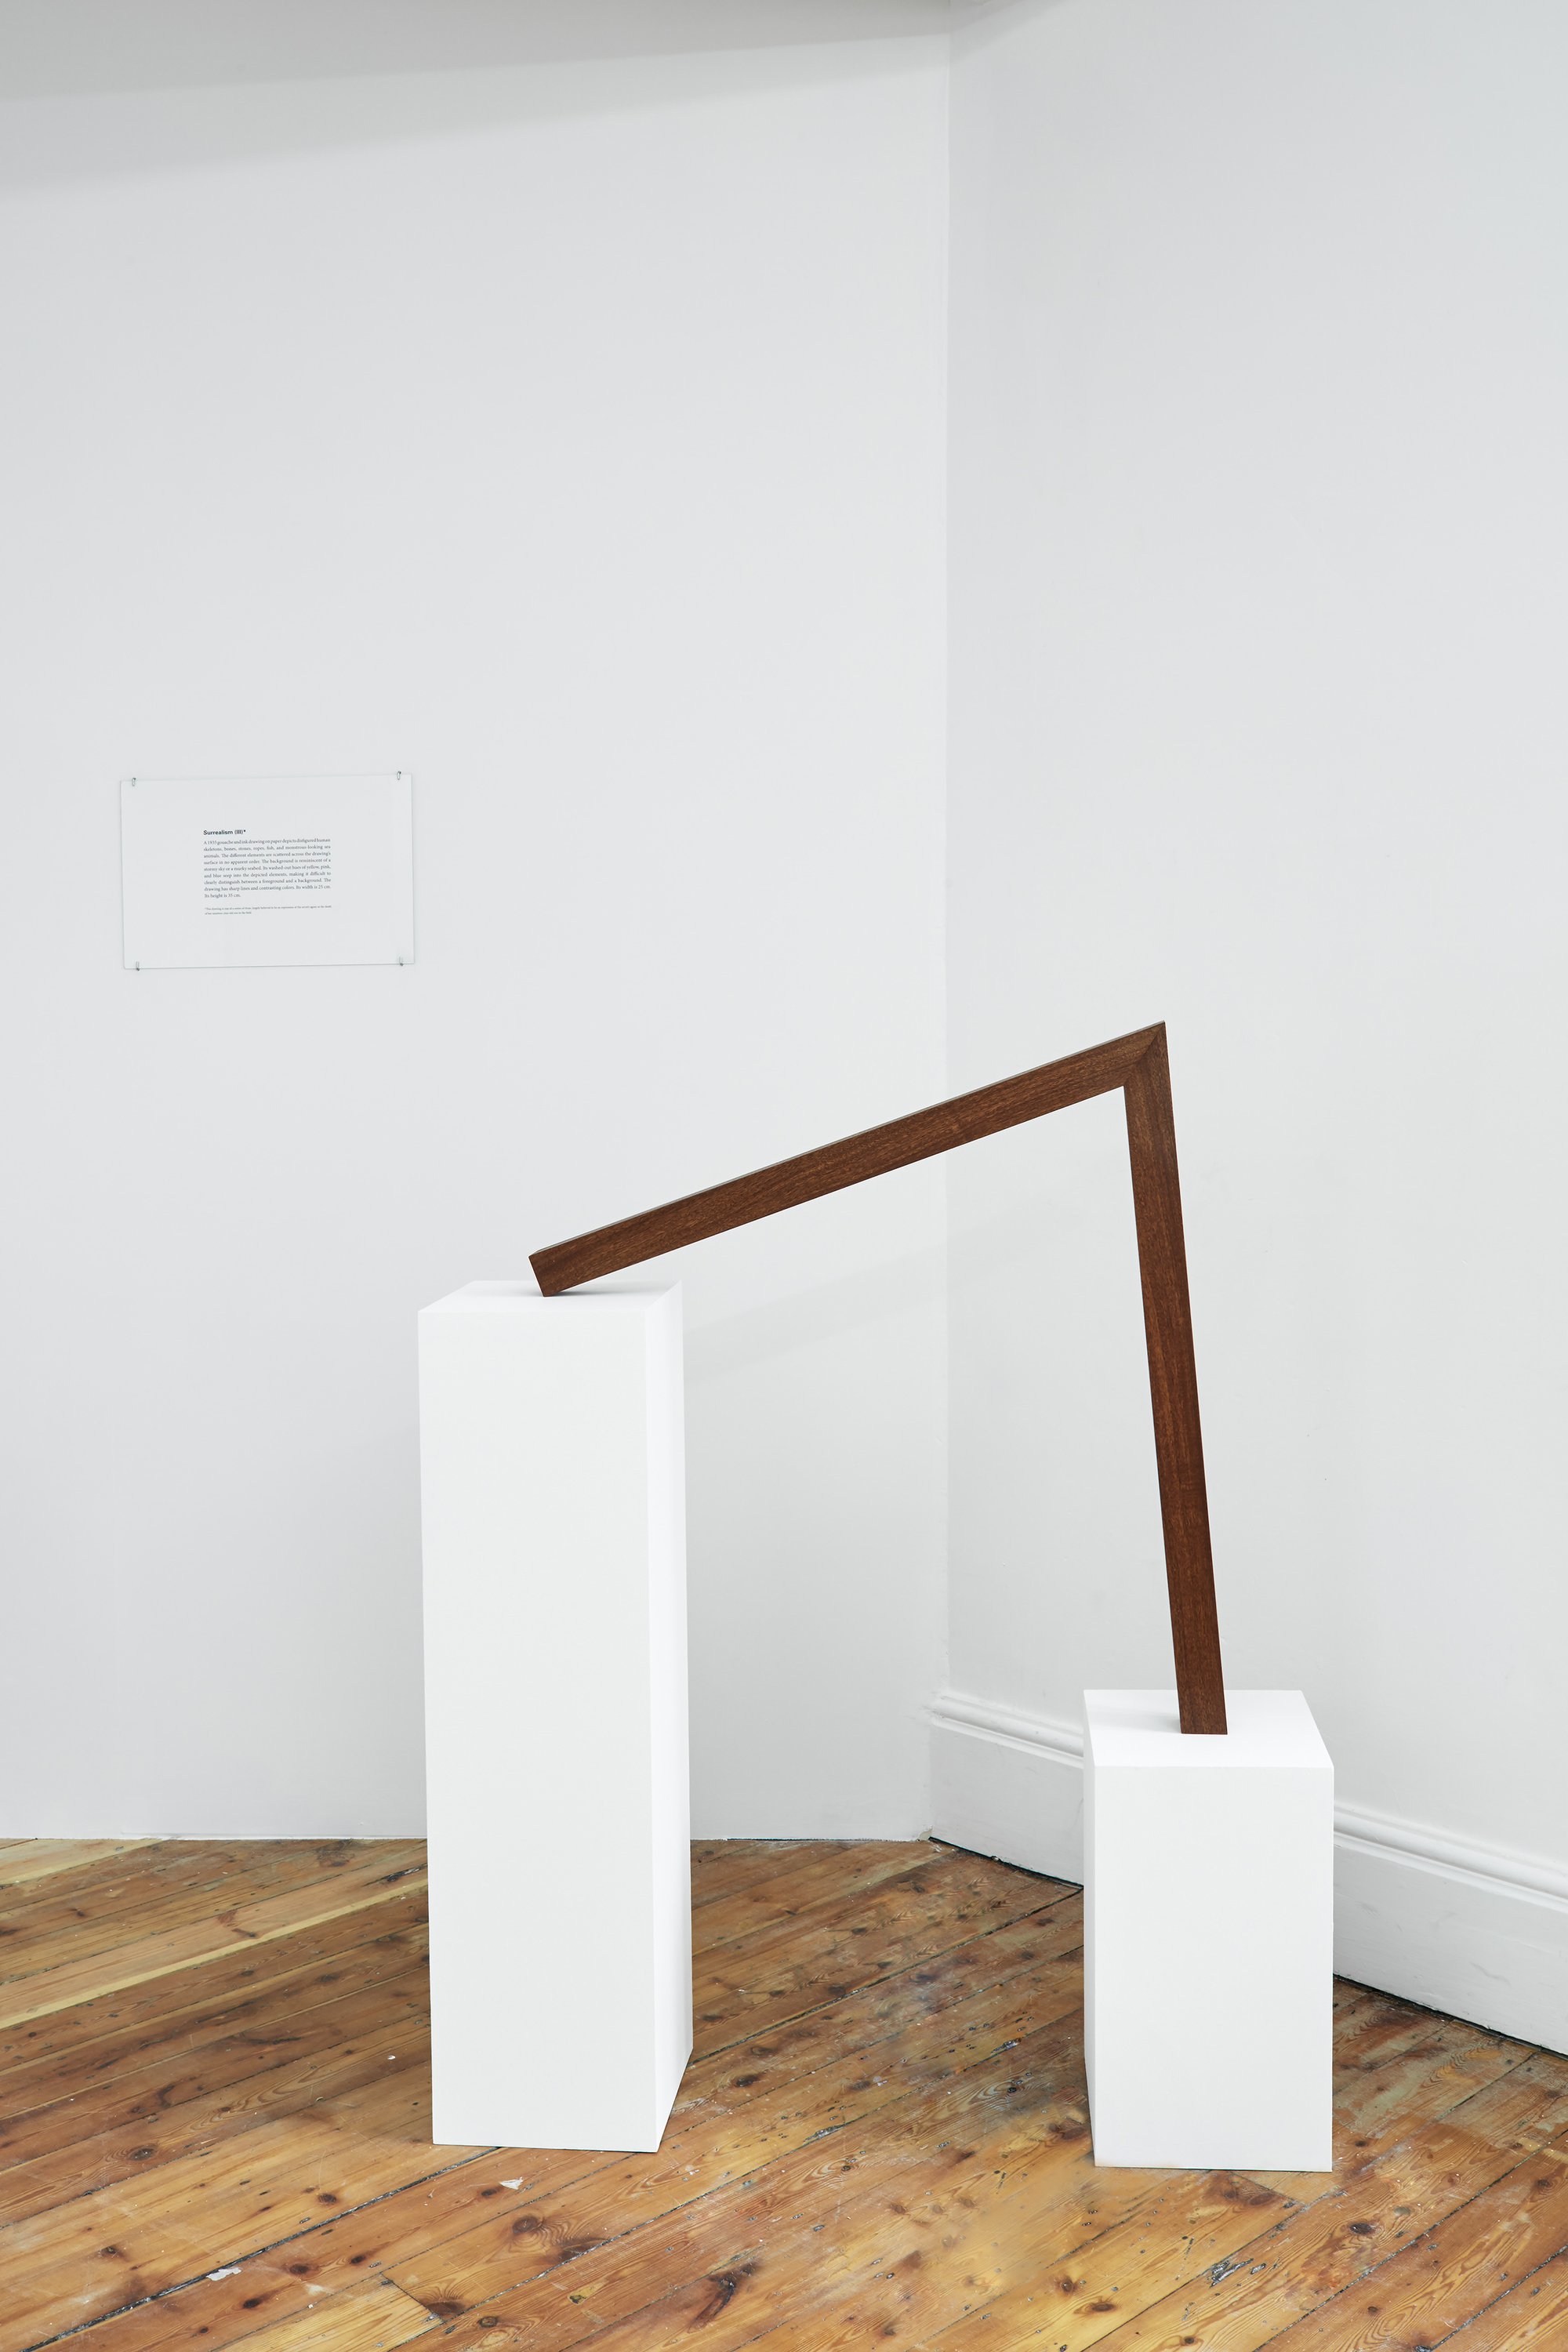 Iman Issa, Surrealism III (study for 2014), mahogany sculpture, text panel under glass and two white plinths, sculpture: 79.6 x 75 x 5 cm (31 3/8 x 29 1/2 x 2 in), small plinth: 45 x 25 x 25 cm (17 3/4 x 9 7/8 x 9 7/8 in), large plinth: 93.3 x 25 x 25 cm (36 3/4 x 9 7/8 x 9 7/8 in), 2014